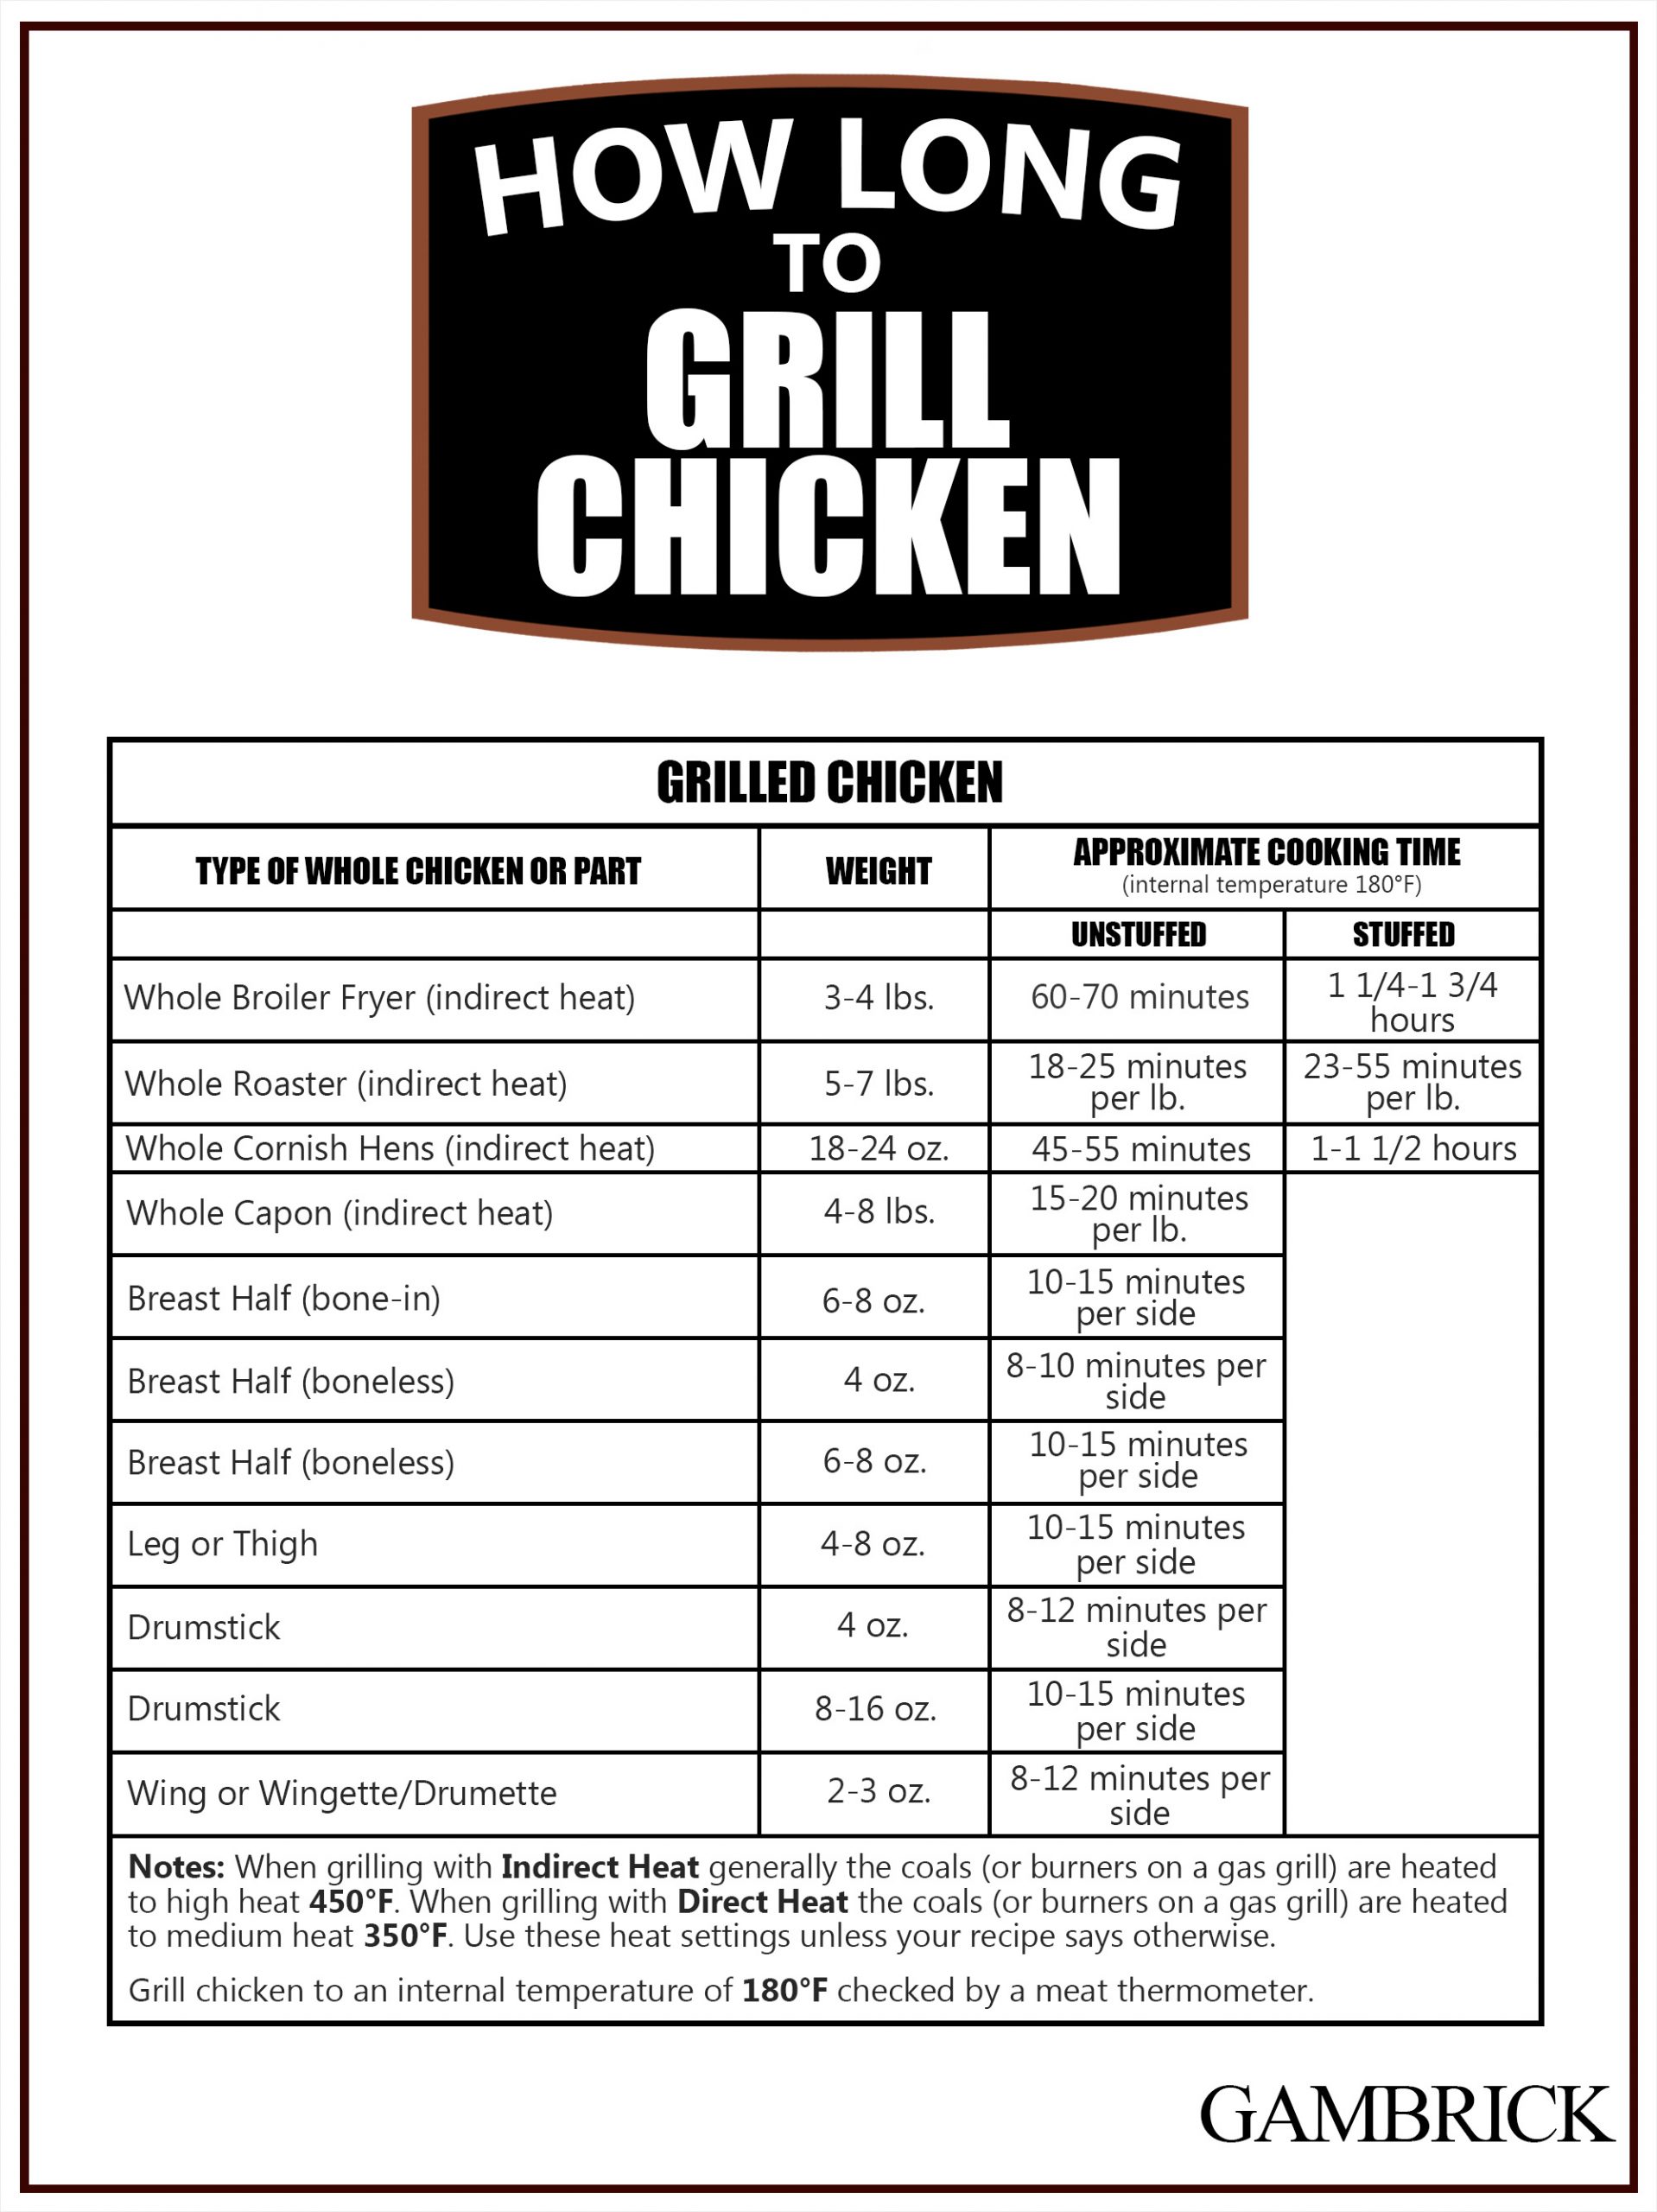 how long to grill chicken infographic 1.0